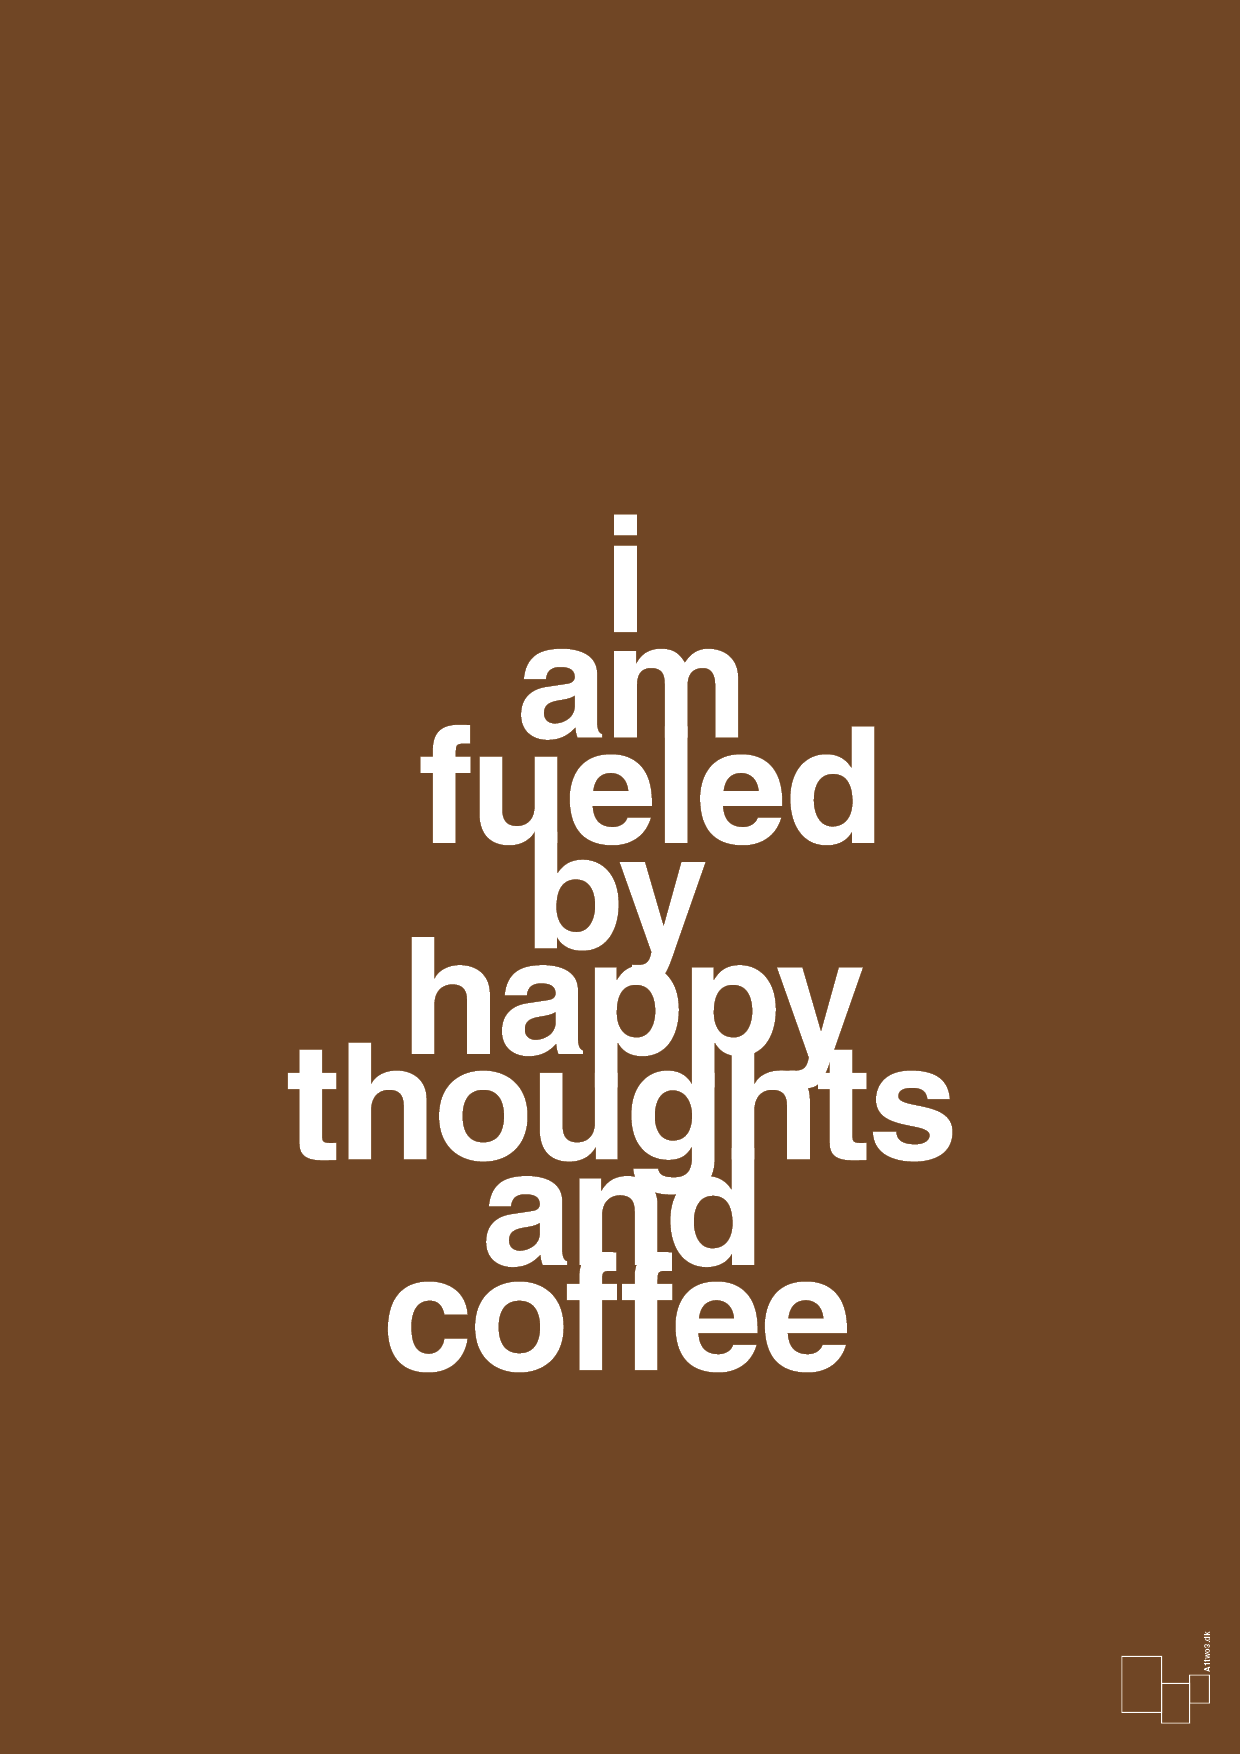 i am fueled by happy thoughts and coffee - Plakat med Mad & Drikke i Dark Brown